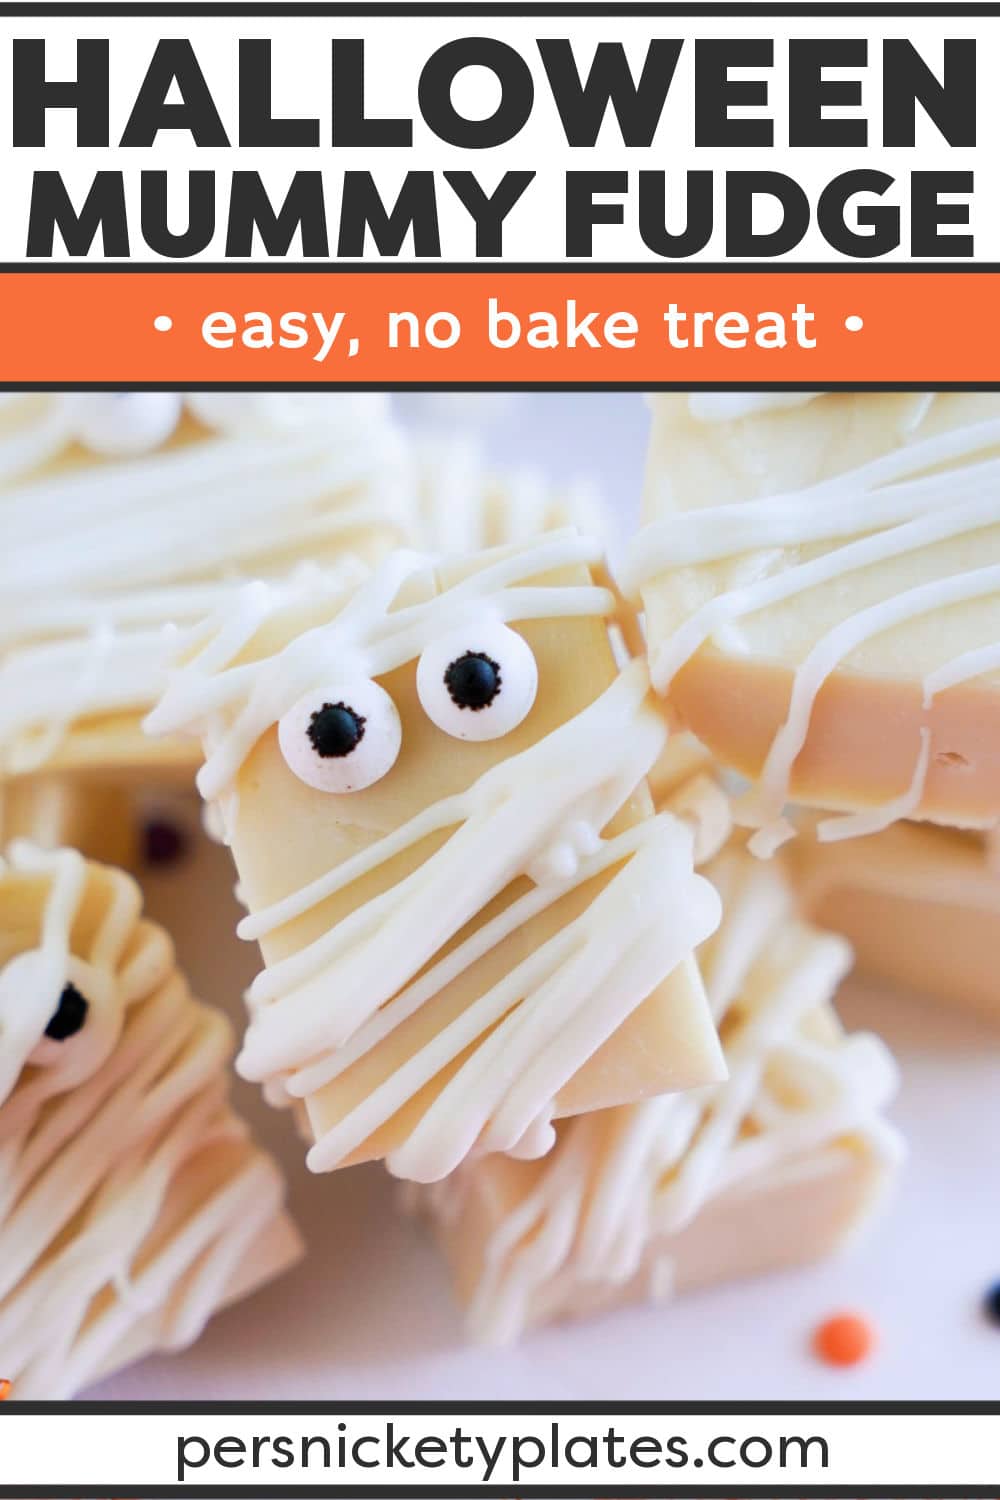 White chocolate Halloween Fudge is a fun and easy treat for the Halloween dessert table. Dressed up like mummies, this easy fudge recipe only requires a few ingredients. | www.persnicketyplates.com